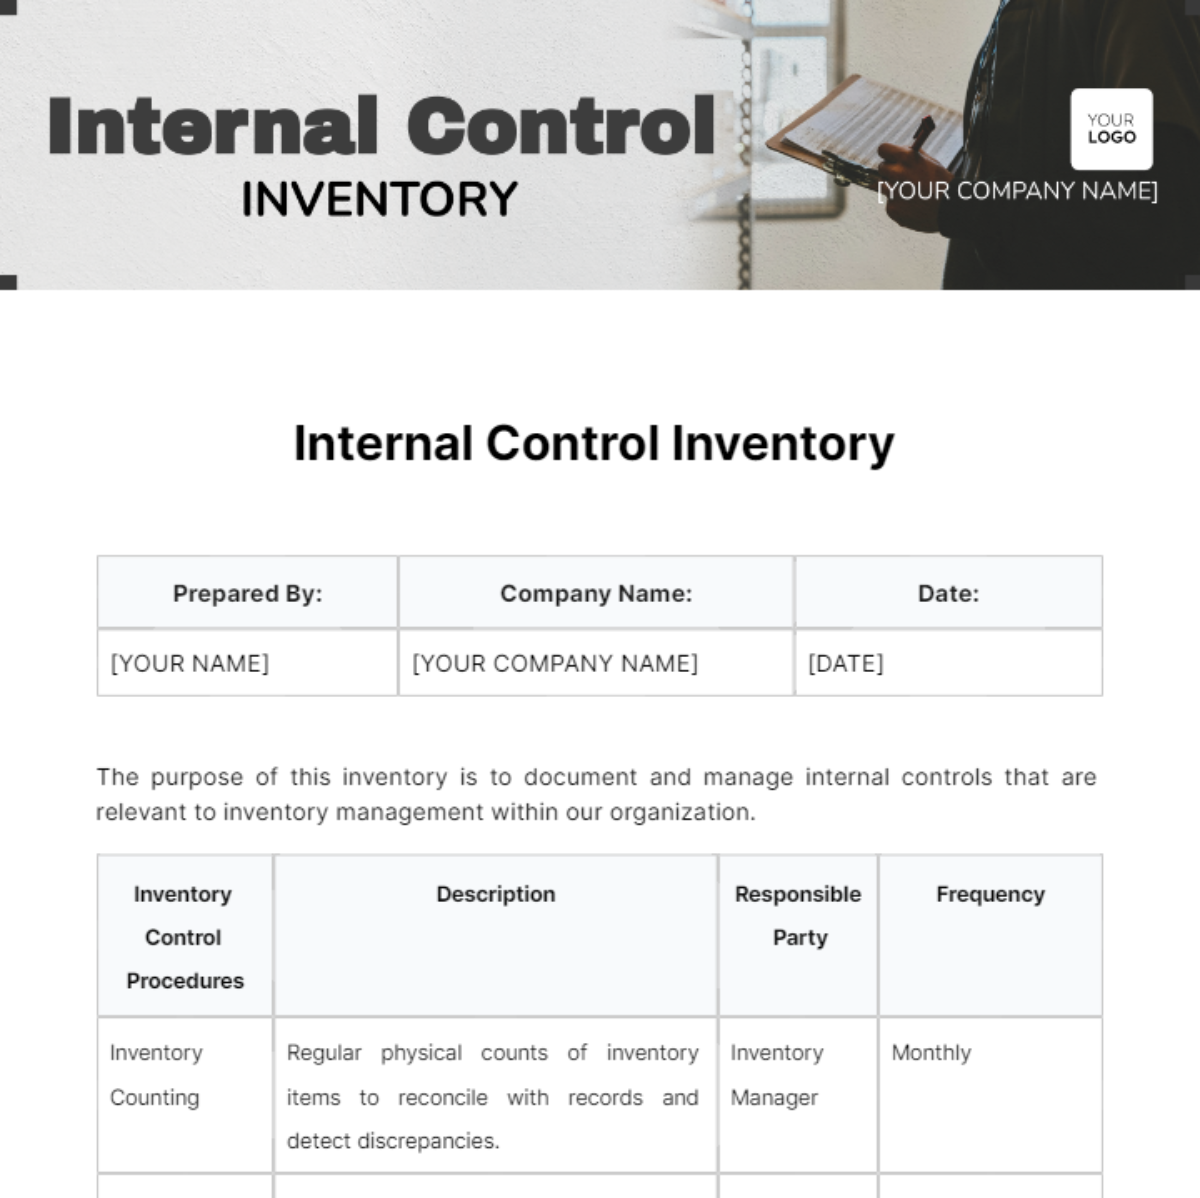 Internal Control Inventory Template